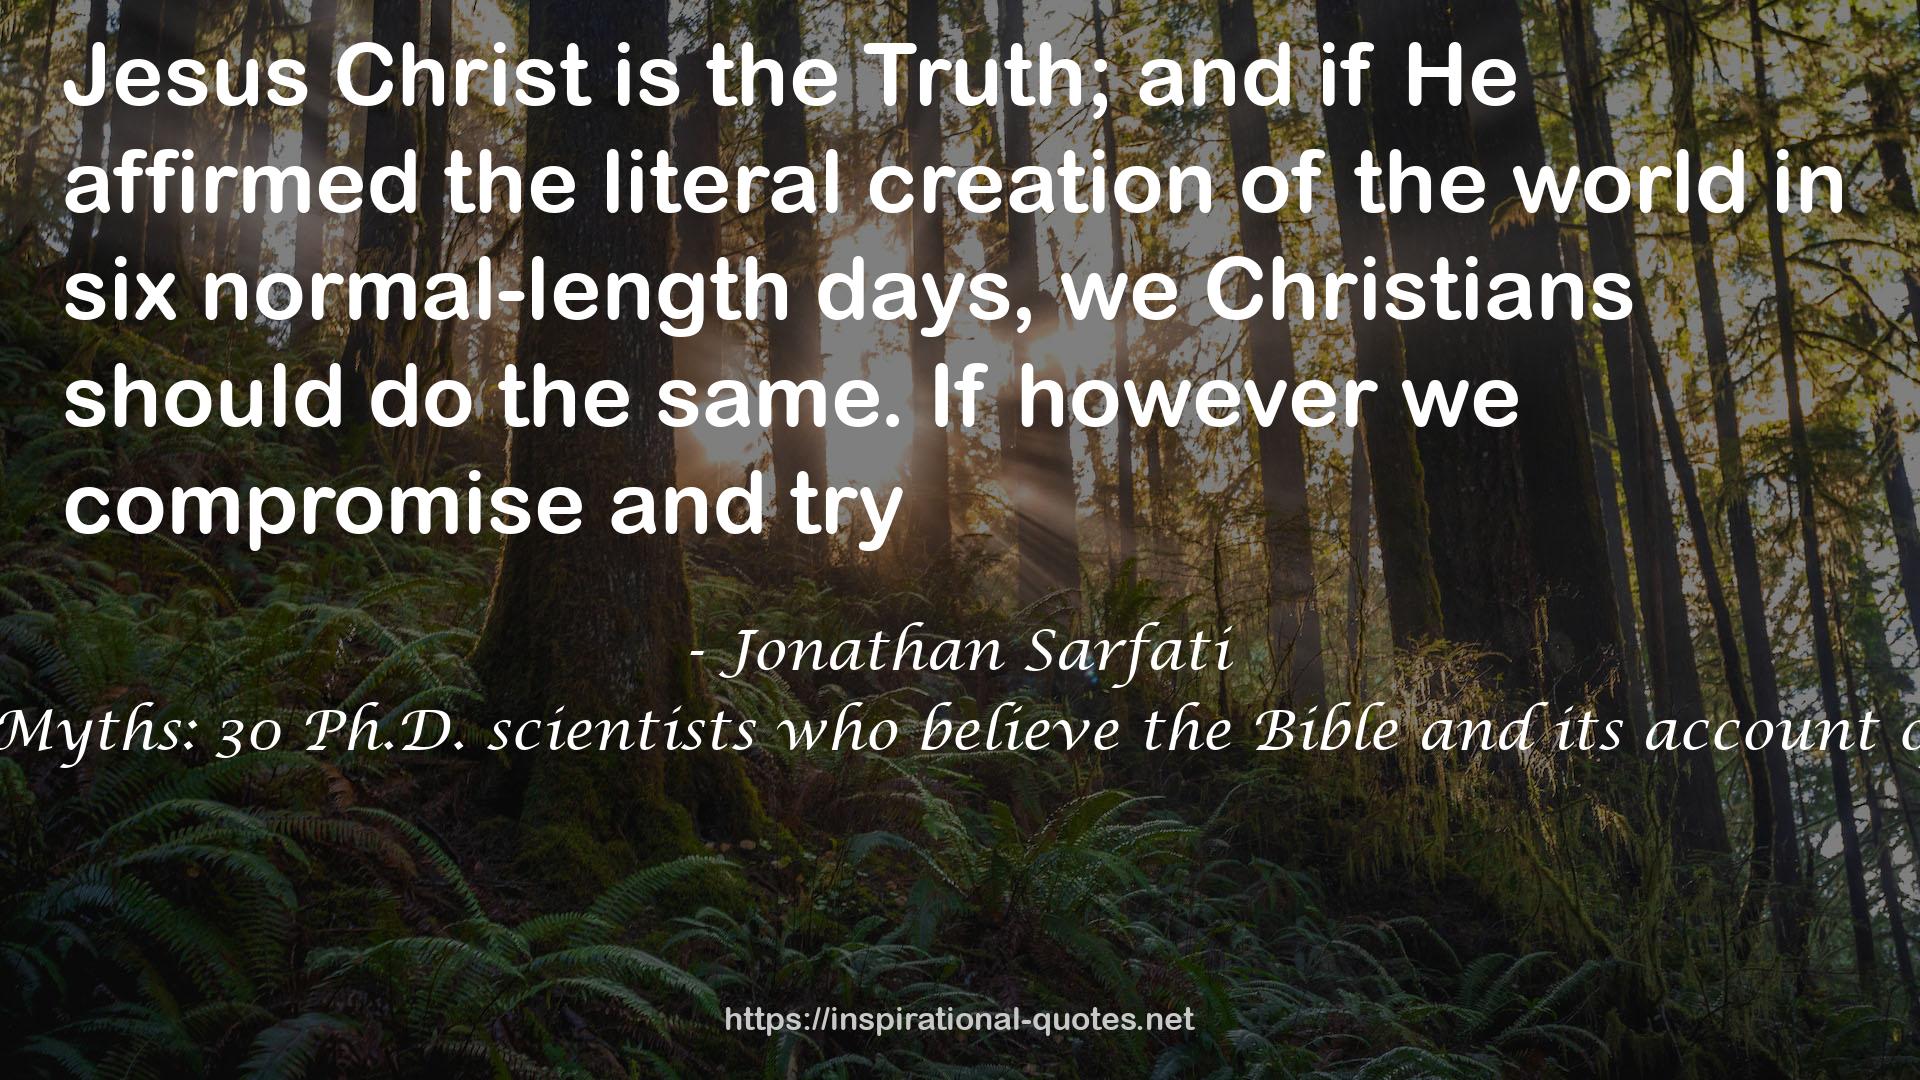 Busting Myths: 30 Ph.D. scientists who believe the Bible and its account of origins QUOTES